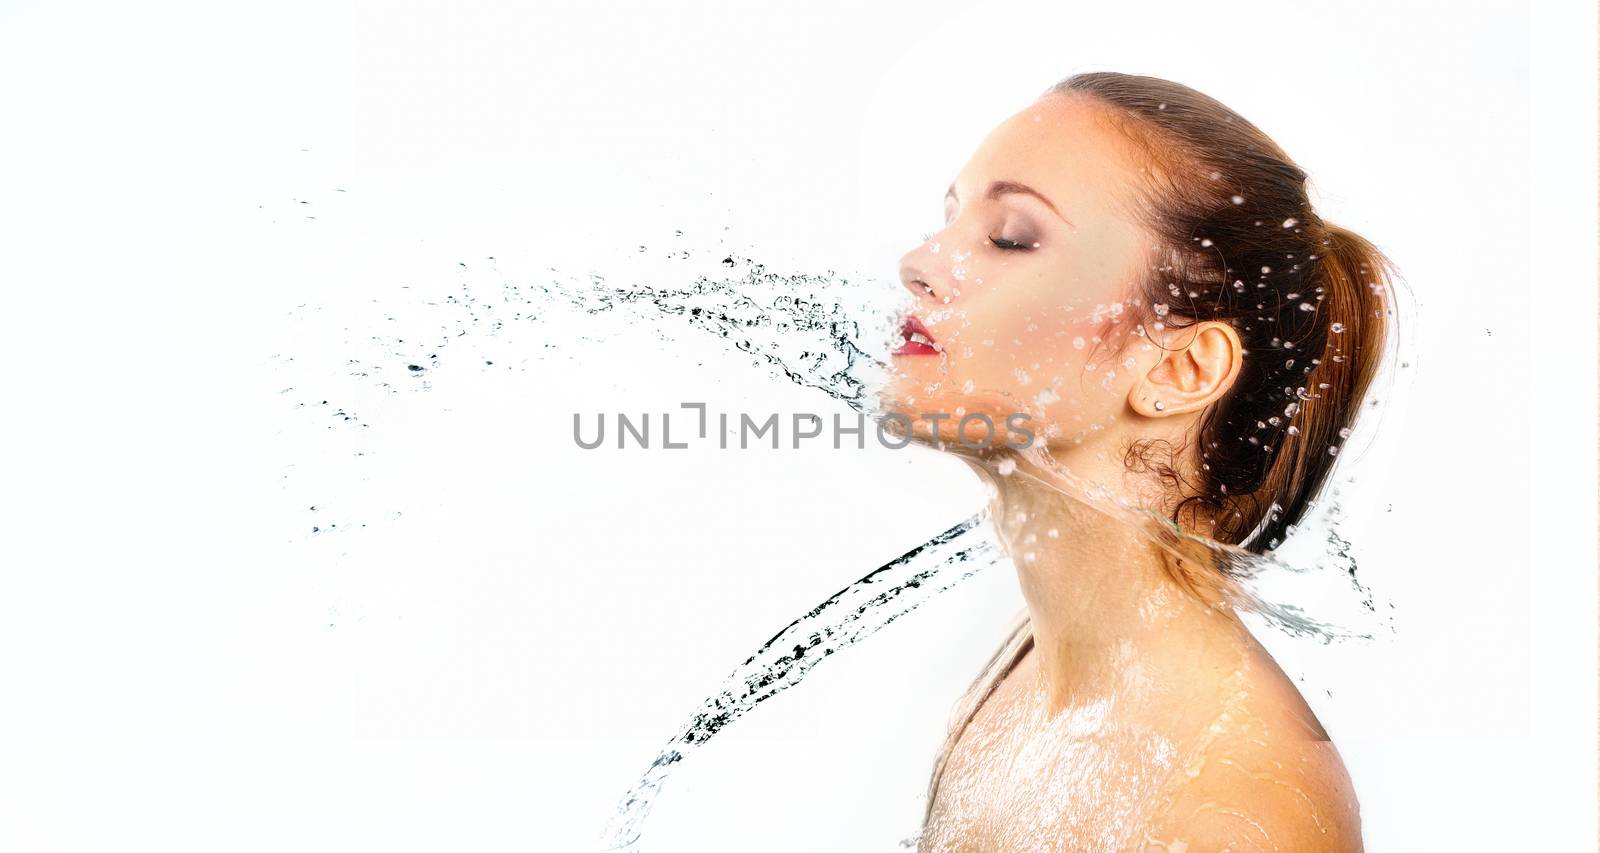 pretty woman with water splash. Beautiful model woman with a splash of water. Beautiful smiling girl underwater with fresh skin on blue background. Skin care, cleansing and moisturizing concept. Pretty face